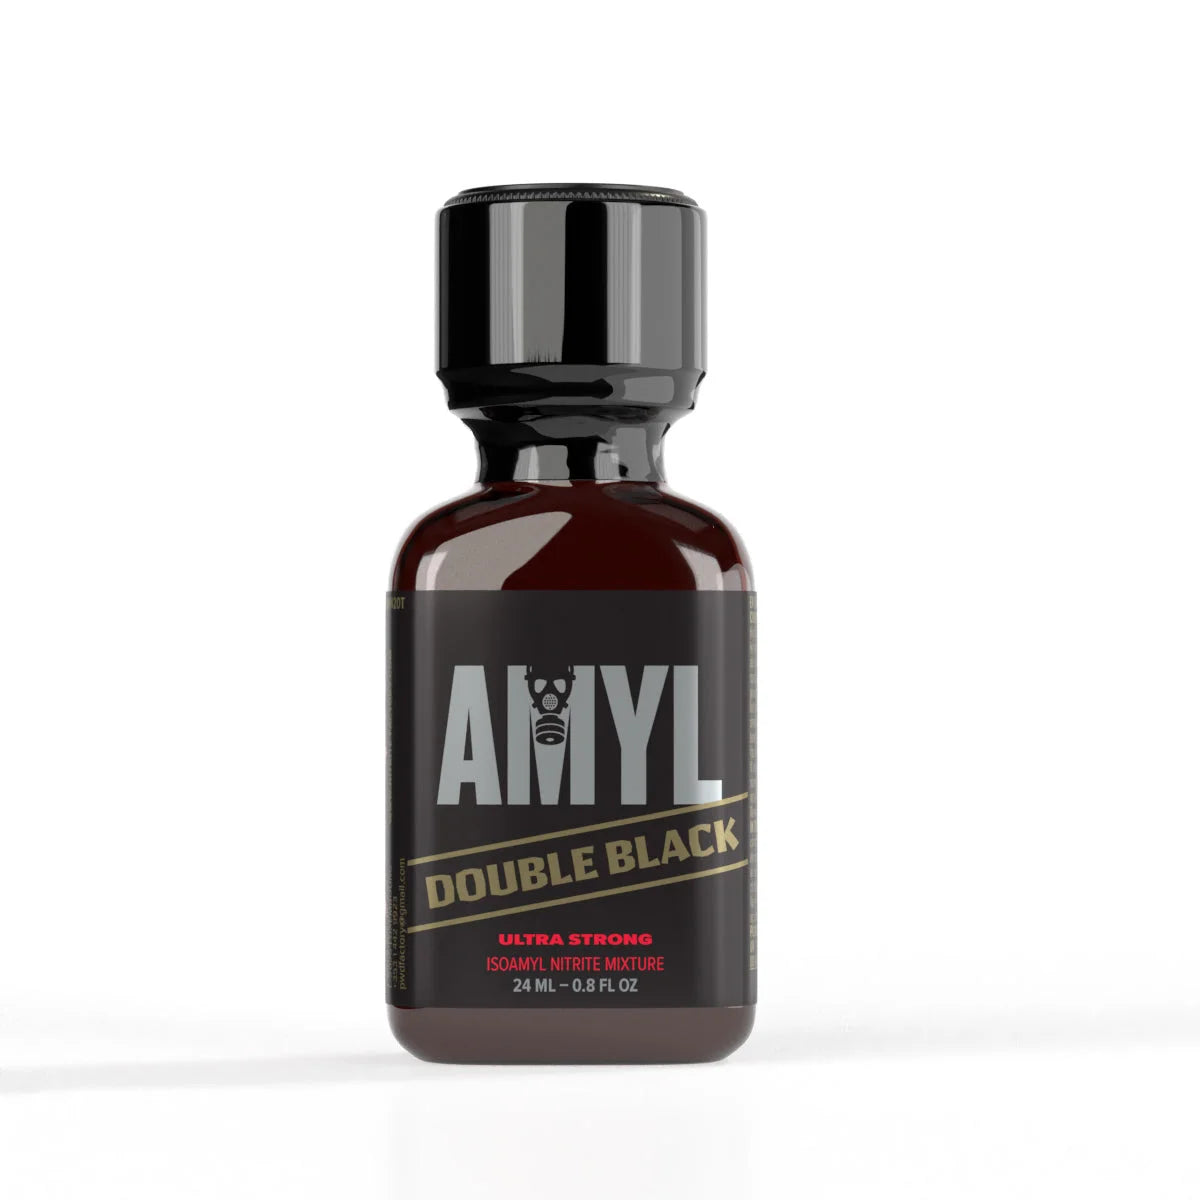 A product photo of a bottle of Amyl Double Black poppers.